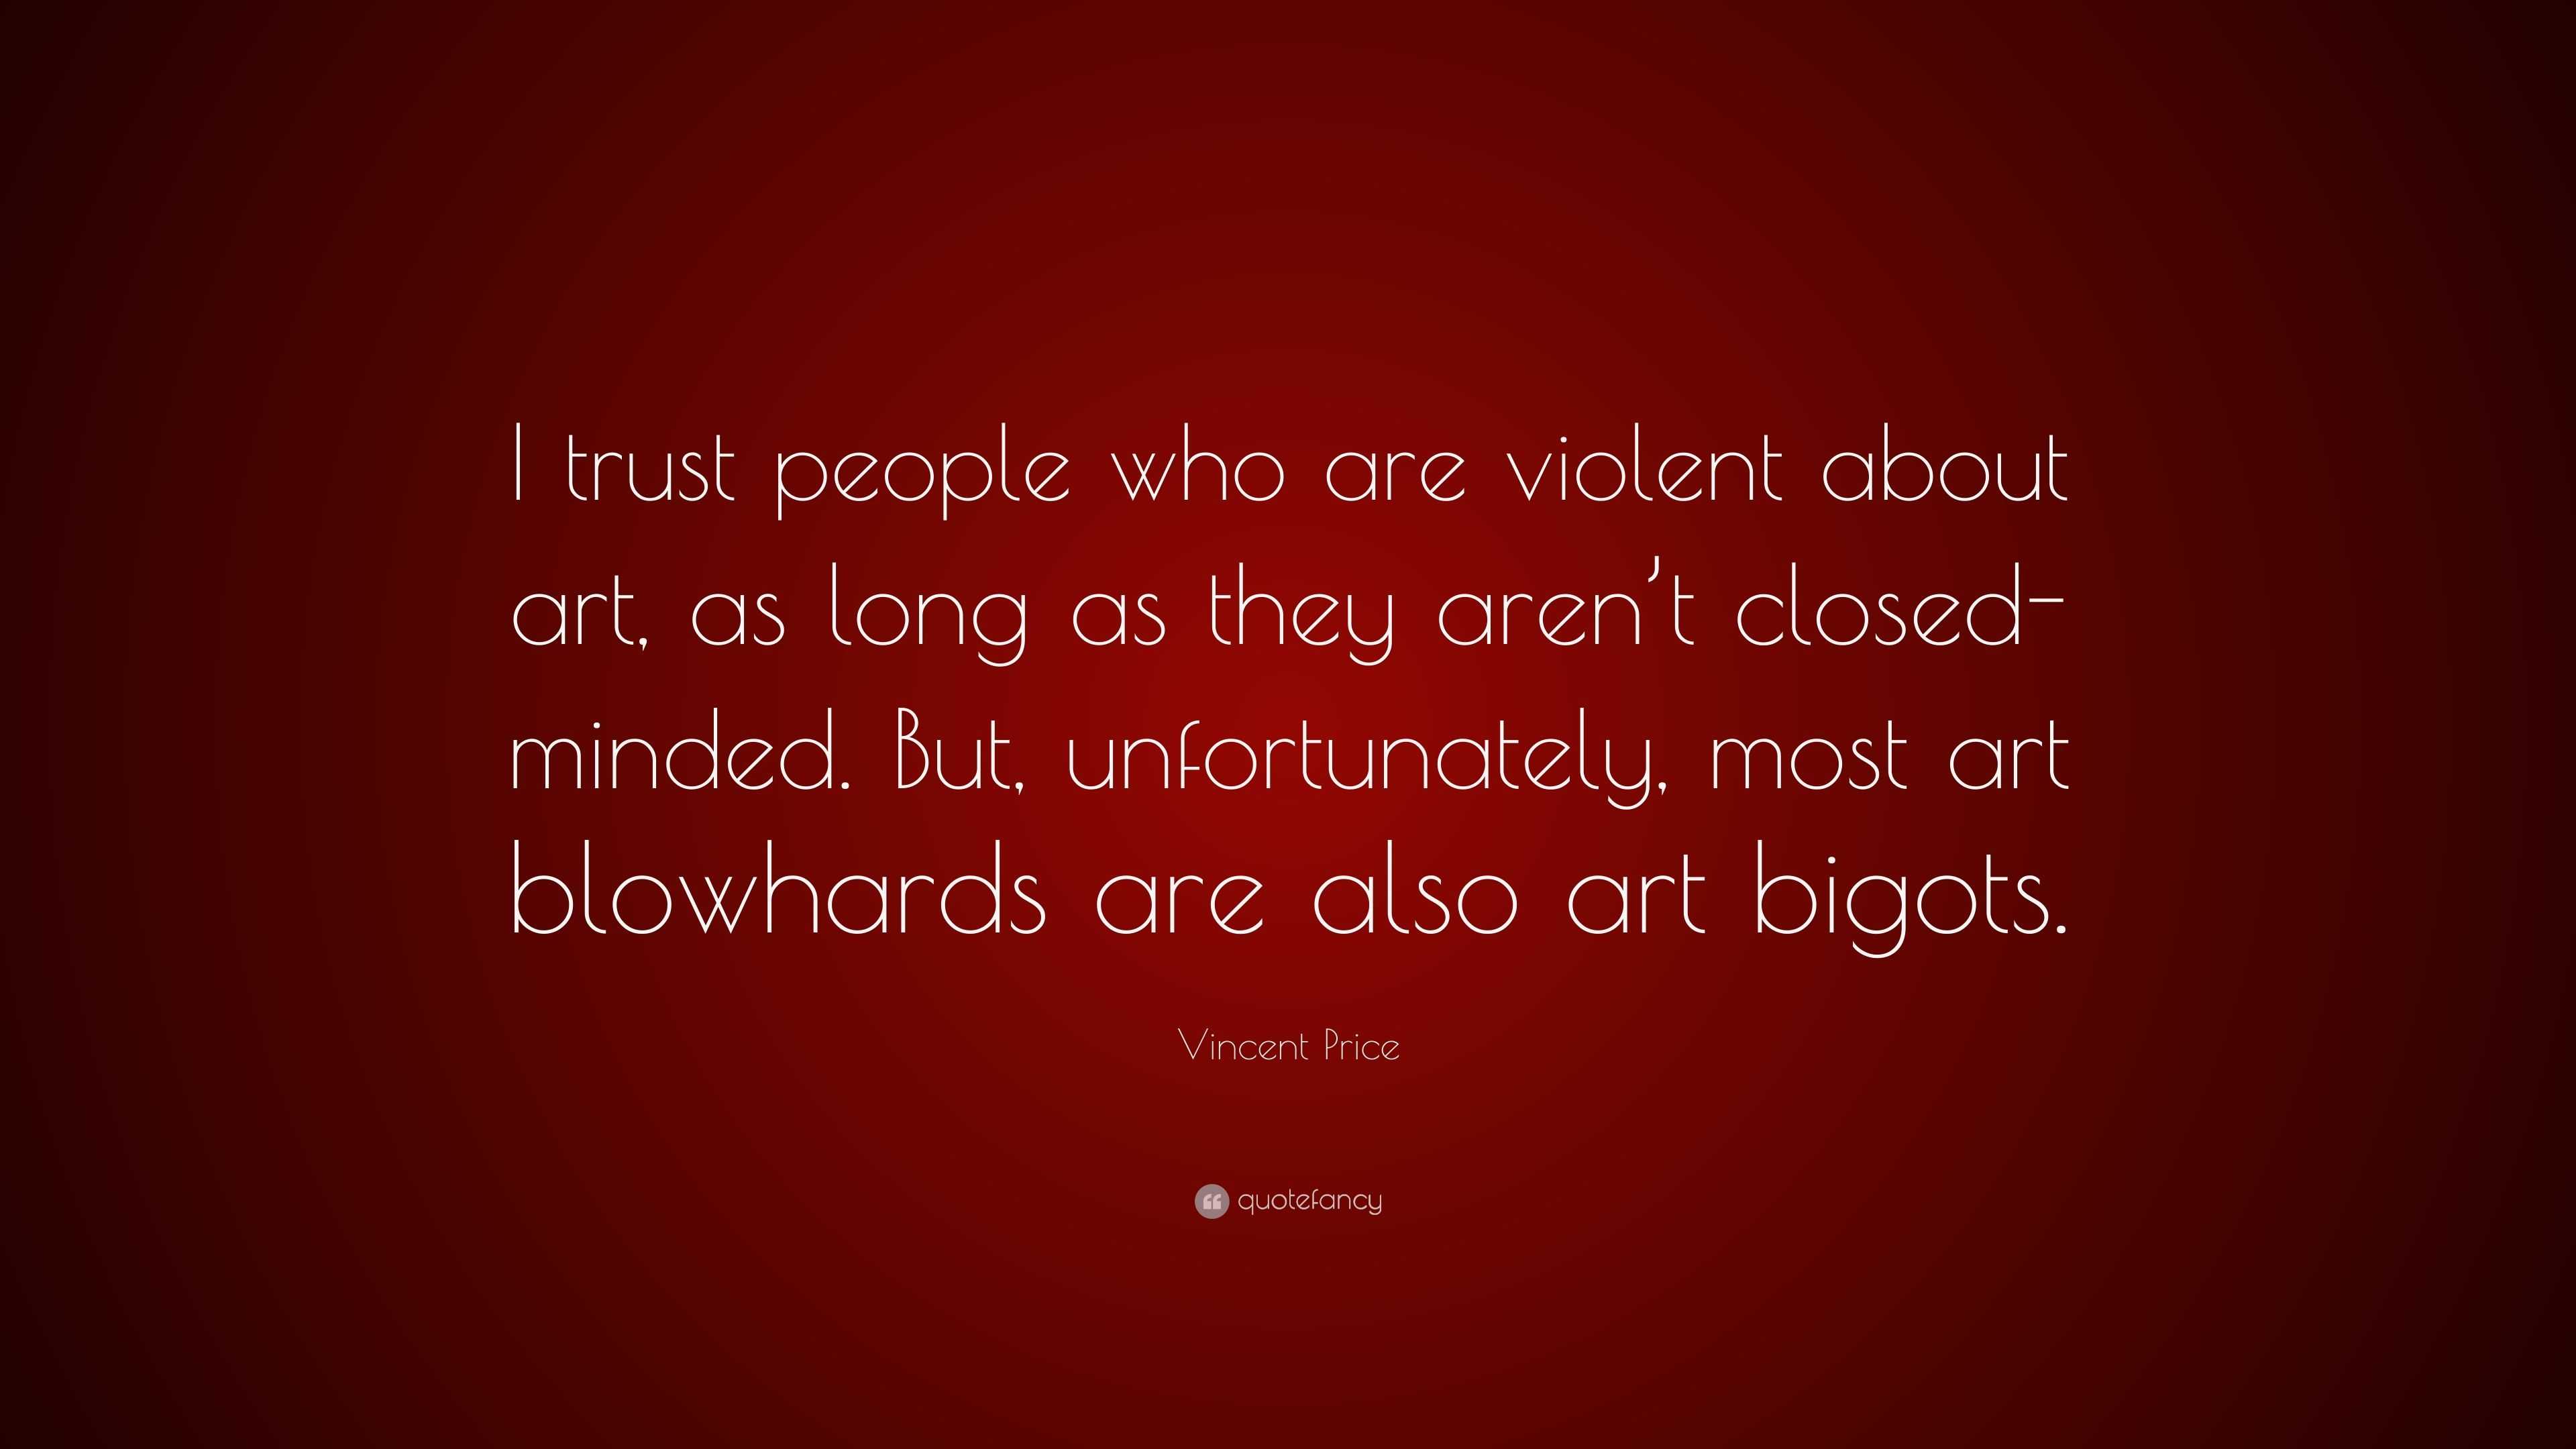 Vincent Price Quote: “I trust people who are violent about art, as long ...